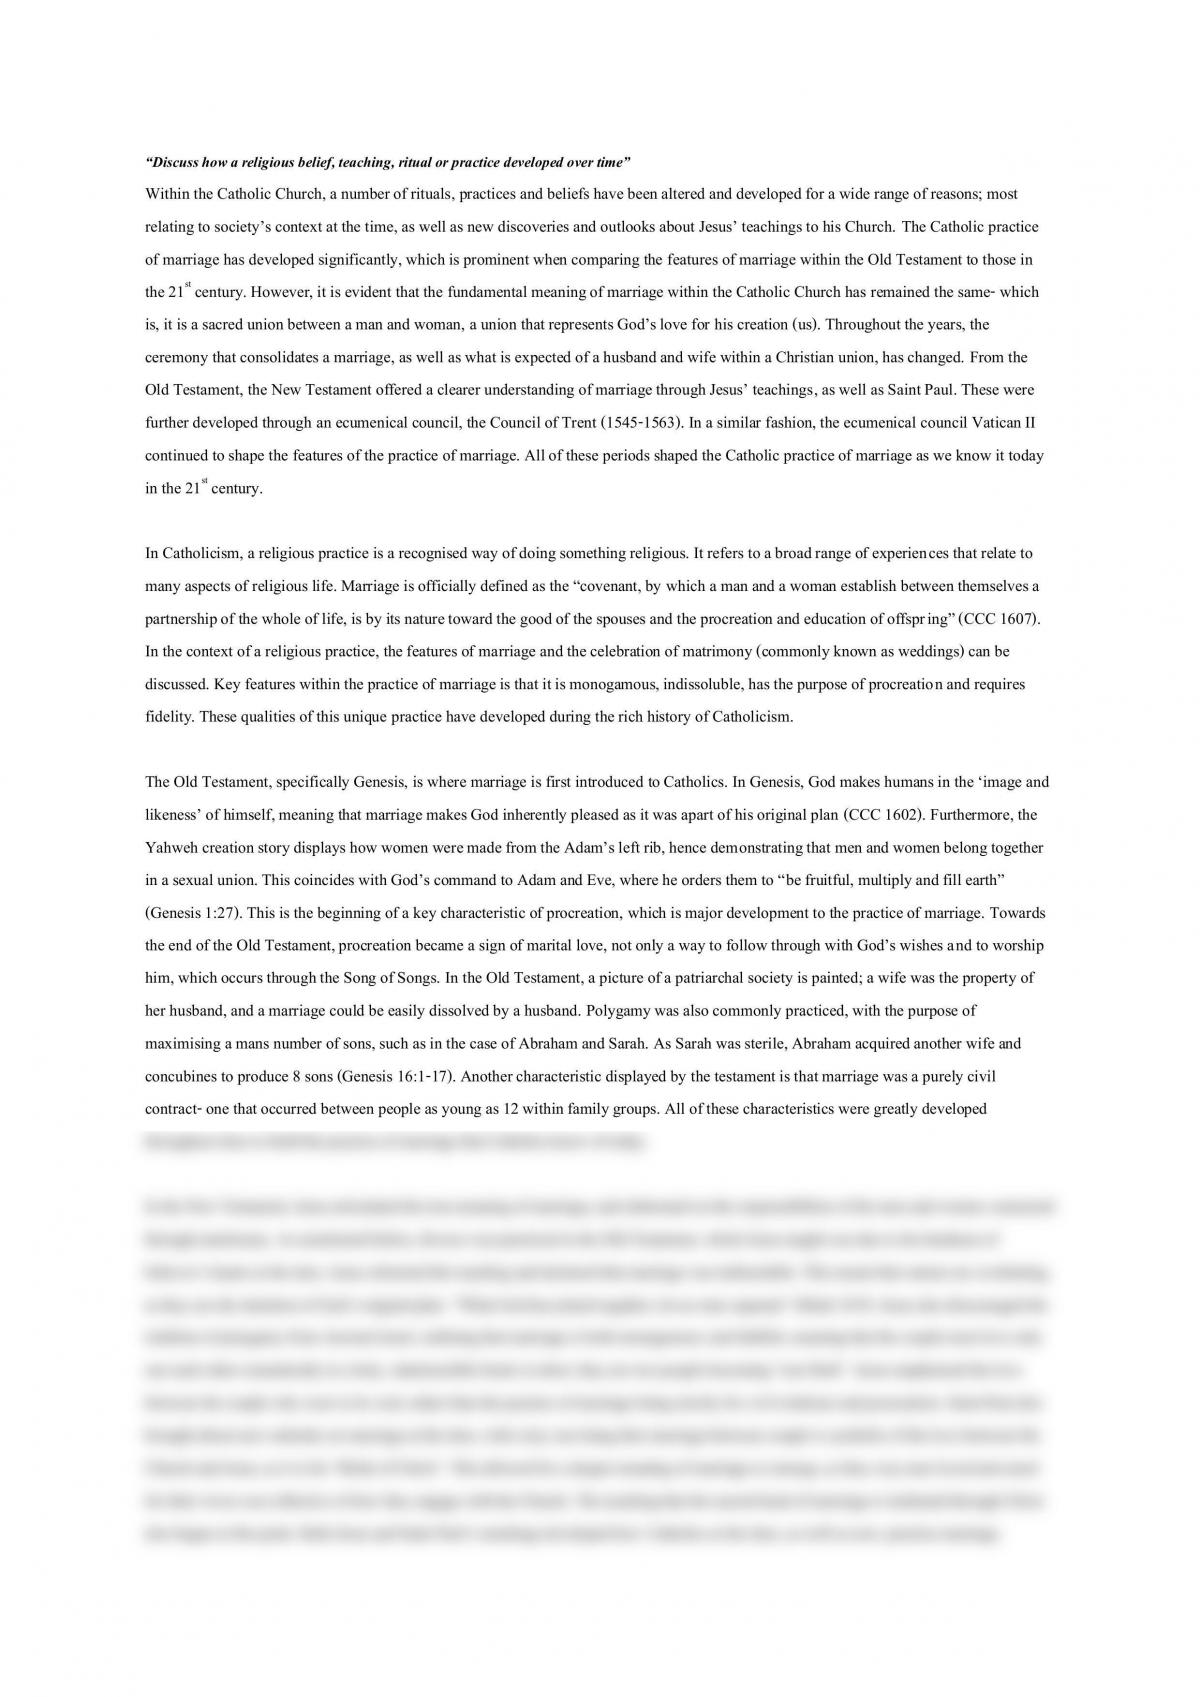 Religion & Life, Development of Marriage Essay  - Page 1